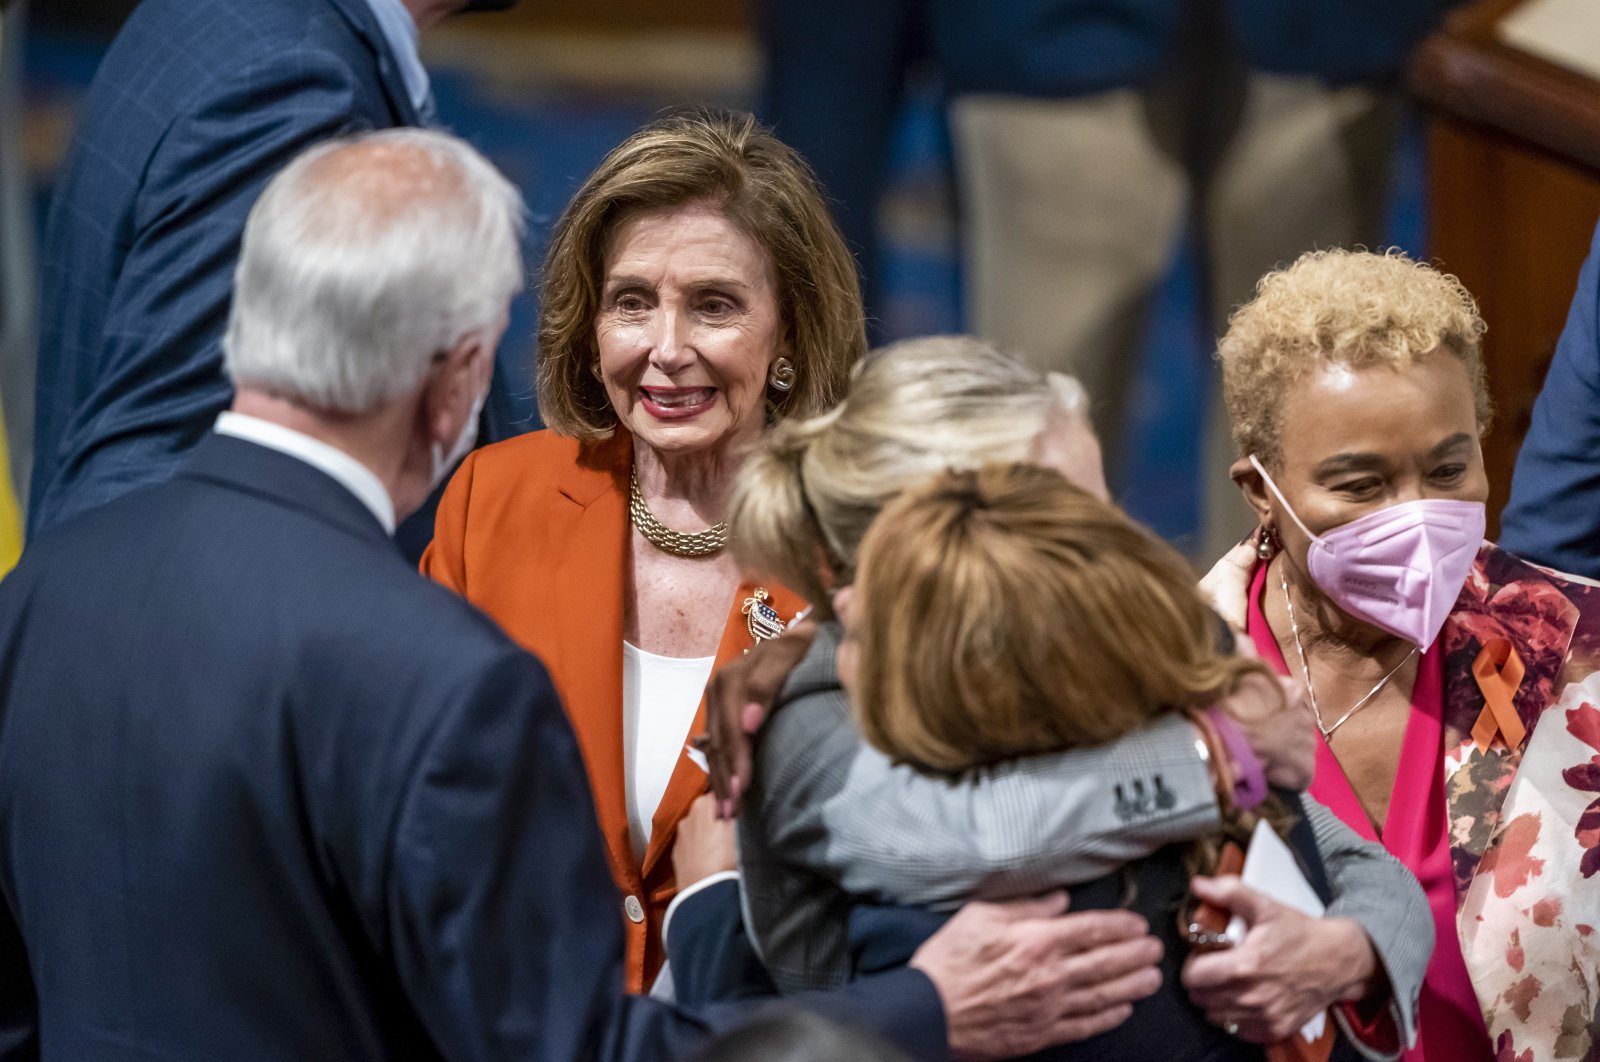 Speaker of the House Nancy Pelosi, D-Calif., greets Rep. Mike Thompson, D-Calif., chairperson of the House Gun Violence Prevention Task Force (L) as Rep. Madeleine Dean, D-Penn., hugs Rep. Lucy McBath, D-Ga., with Rep. Barbara Lee, D-Calif. (R) after passage of the gun safety bill in the House, at the Capitol in Washington, June 24, 2022. (AP Photo)